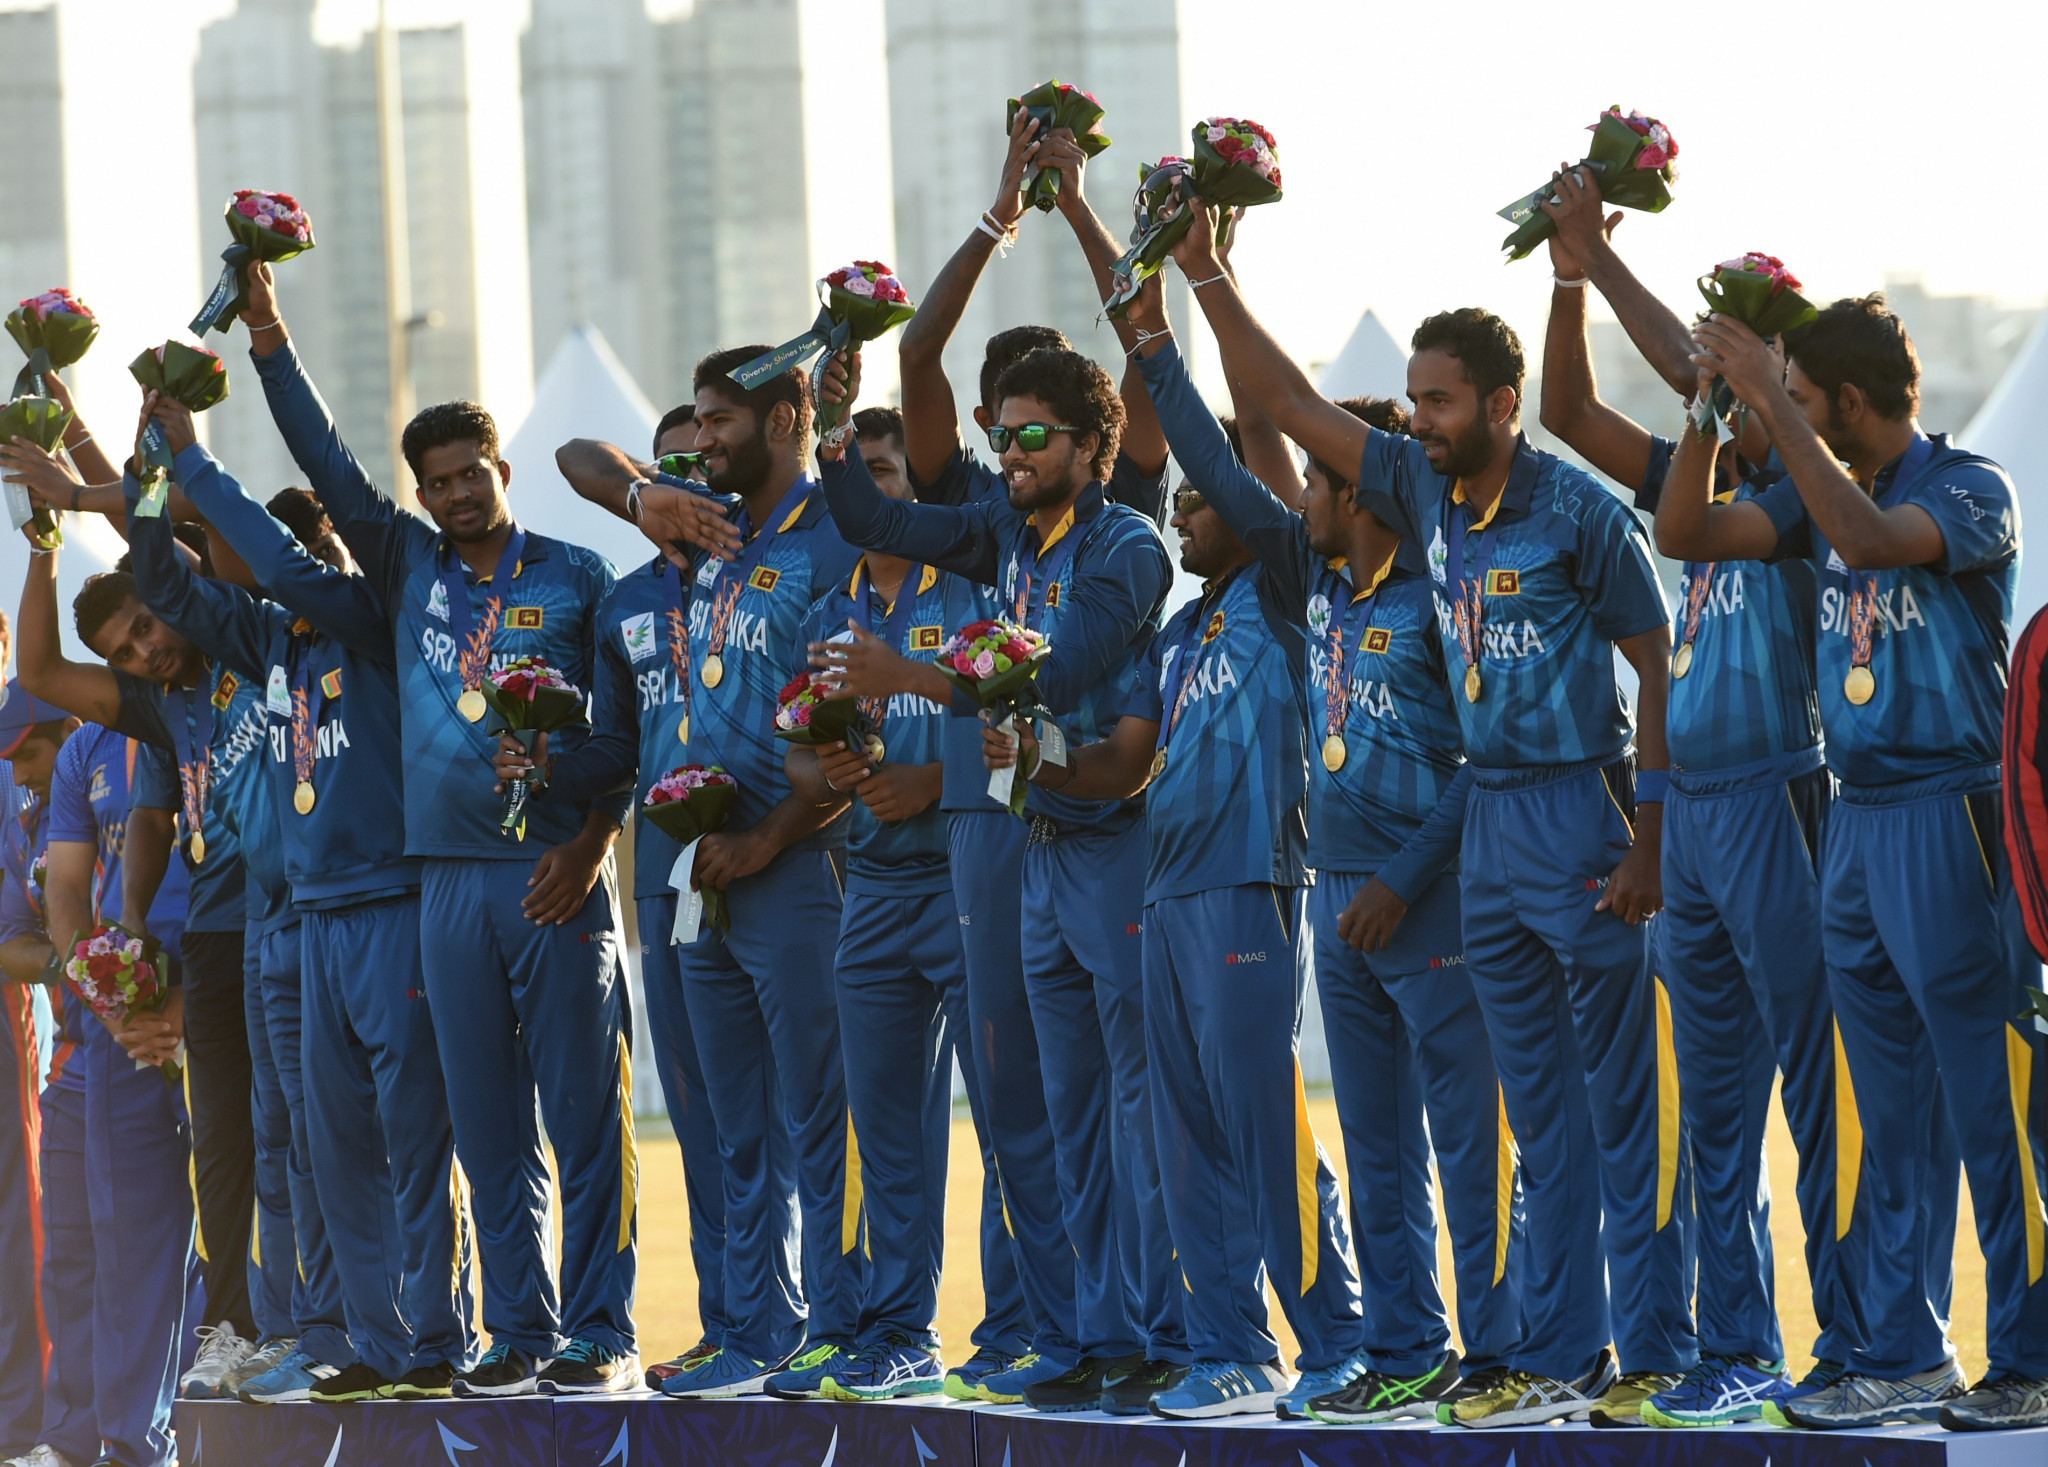 Sri Lanka won men's cricket gold at the Incheon 2014 Asian Games ©Getty Images